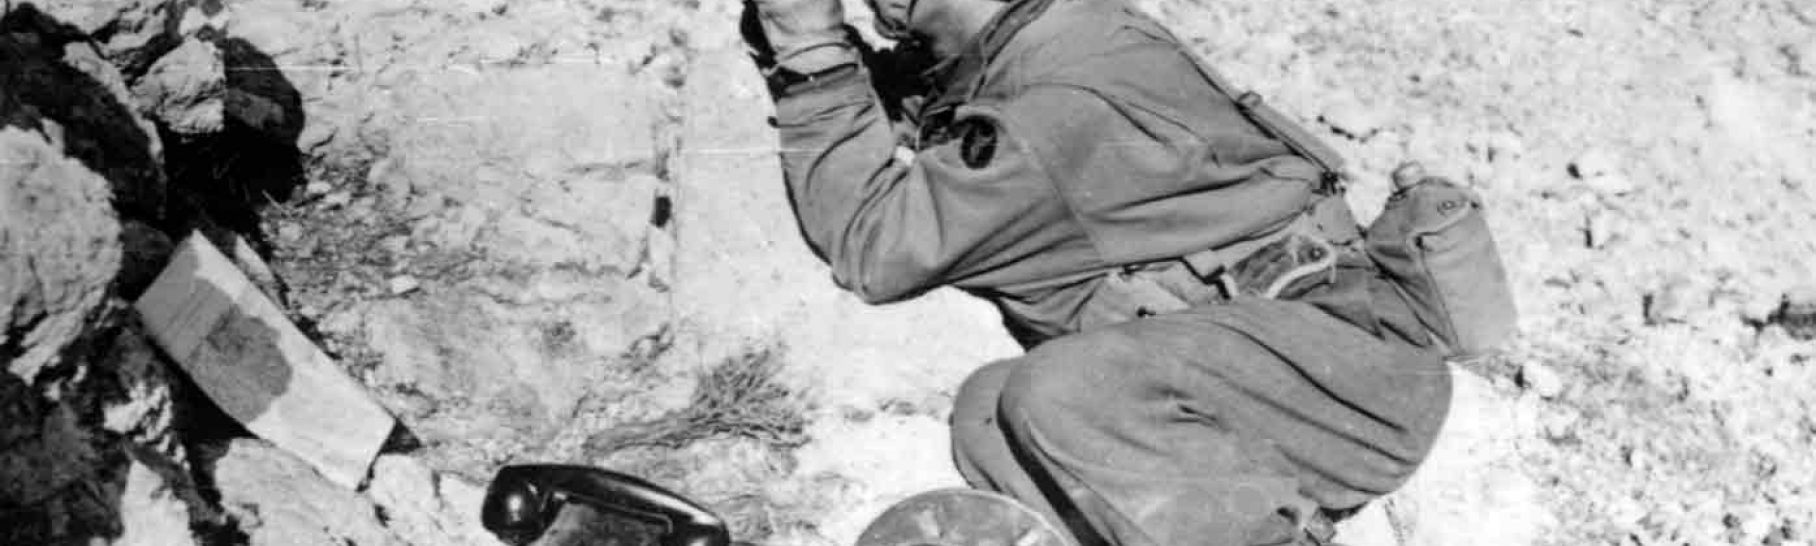 An Iowa soldier, part of the 34th Division, looking through binoculars in North Africa in 1943.